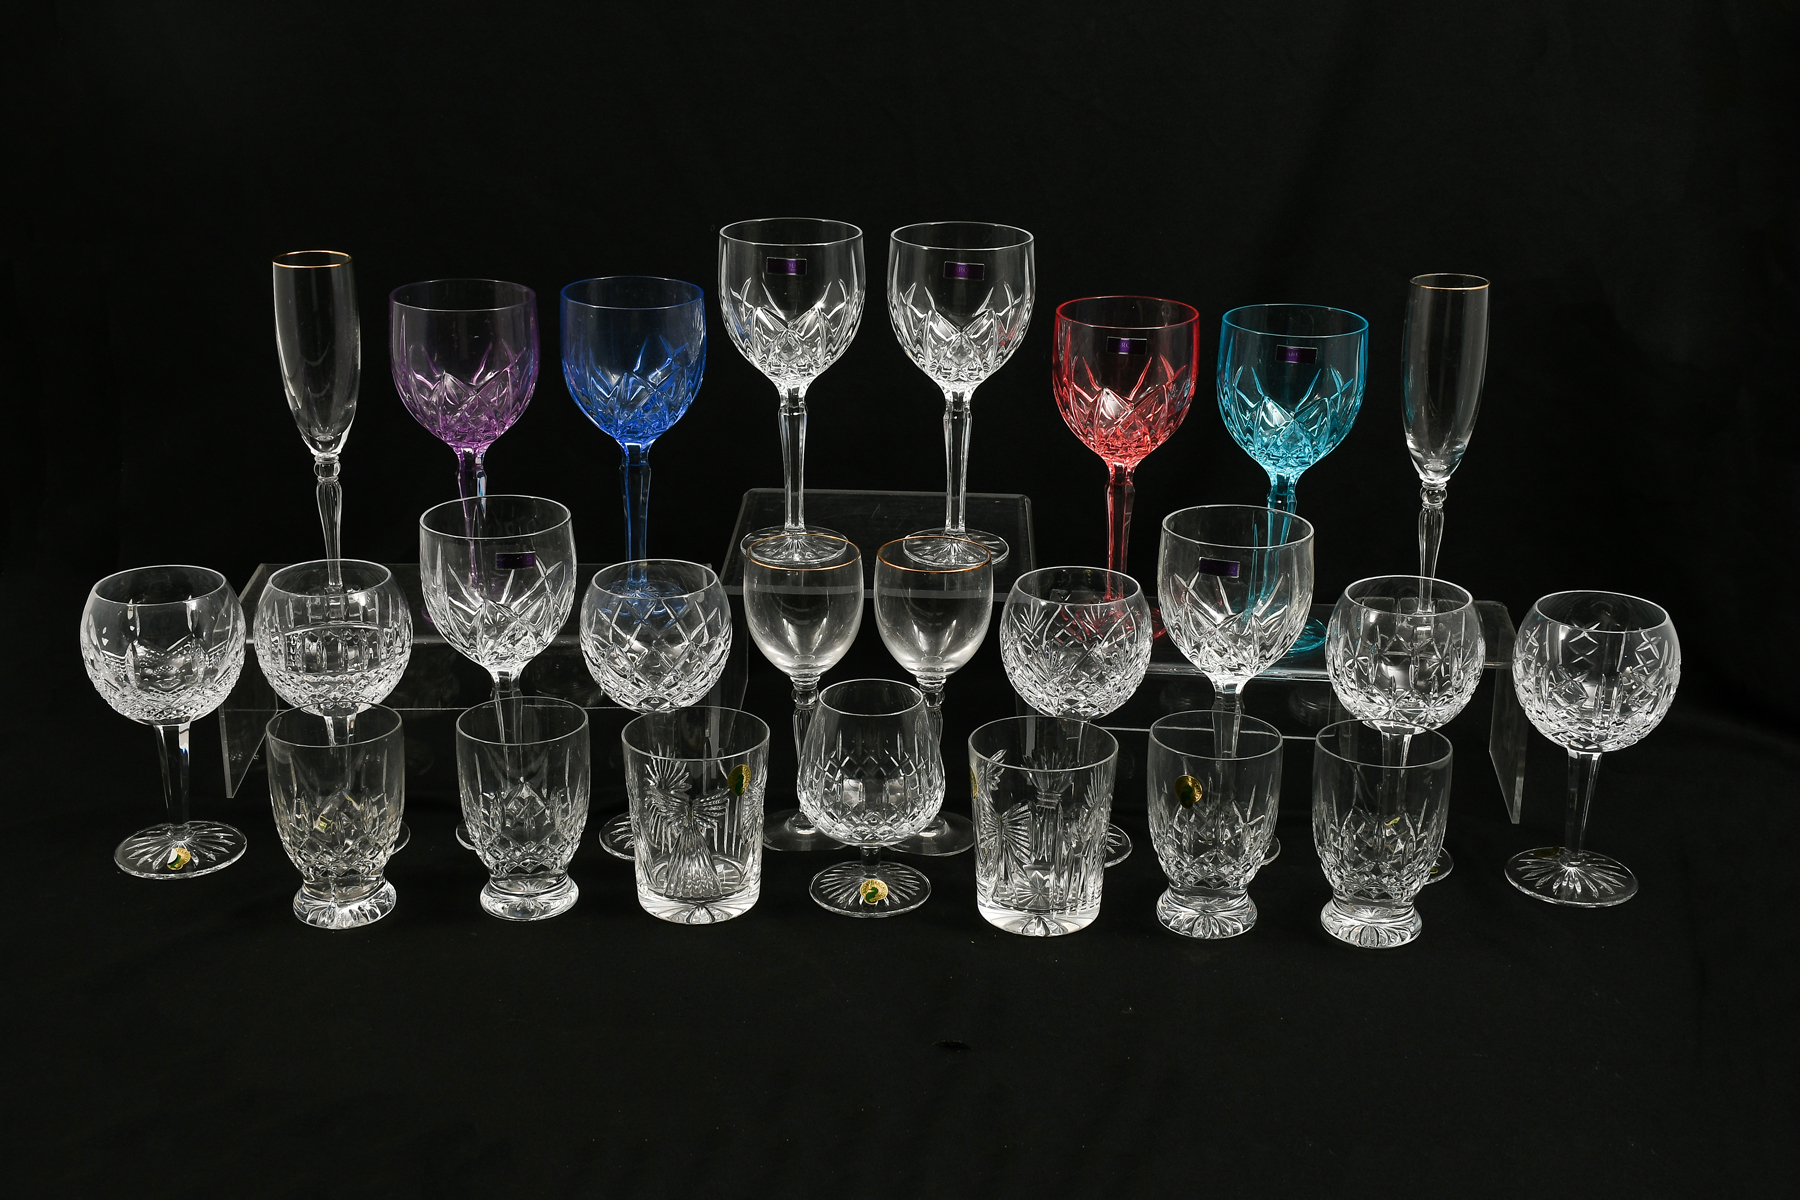 25-PC. WATERFORD CTYSTAL GLASSWARE: